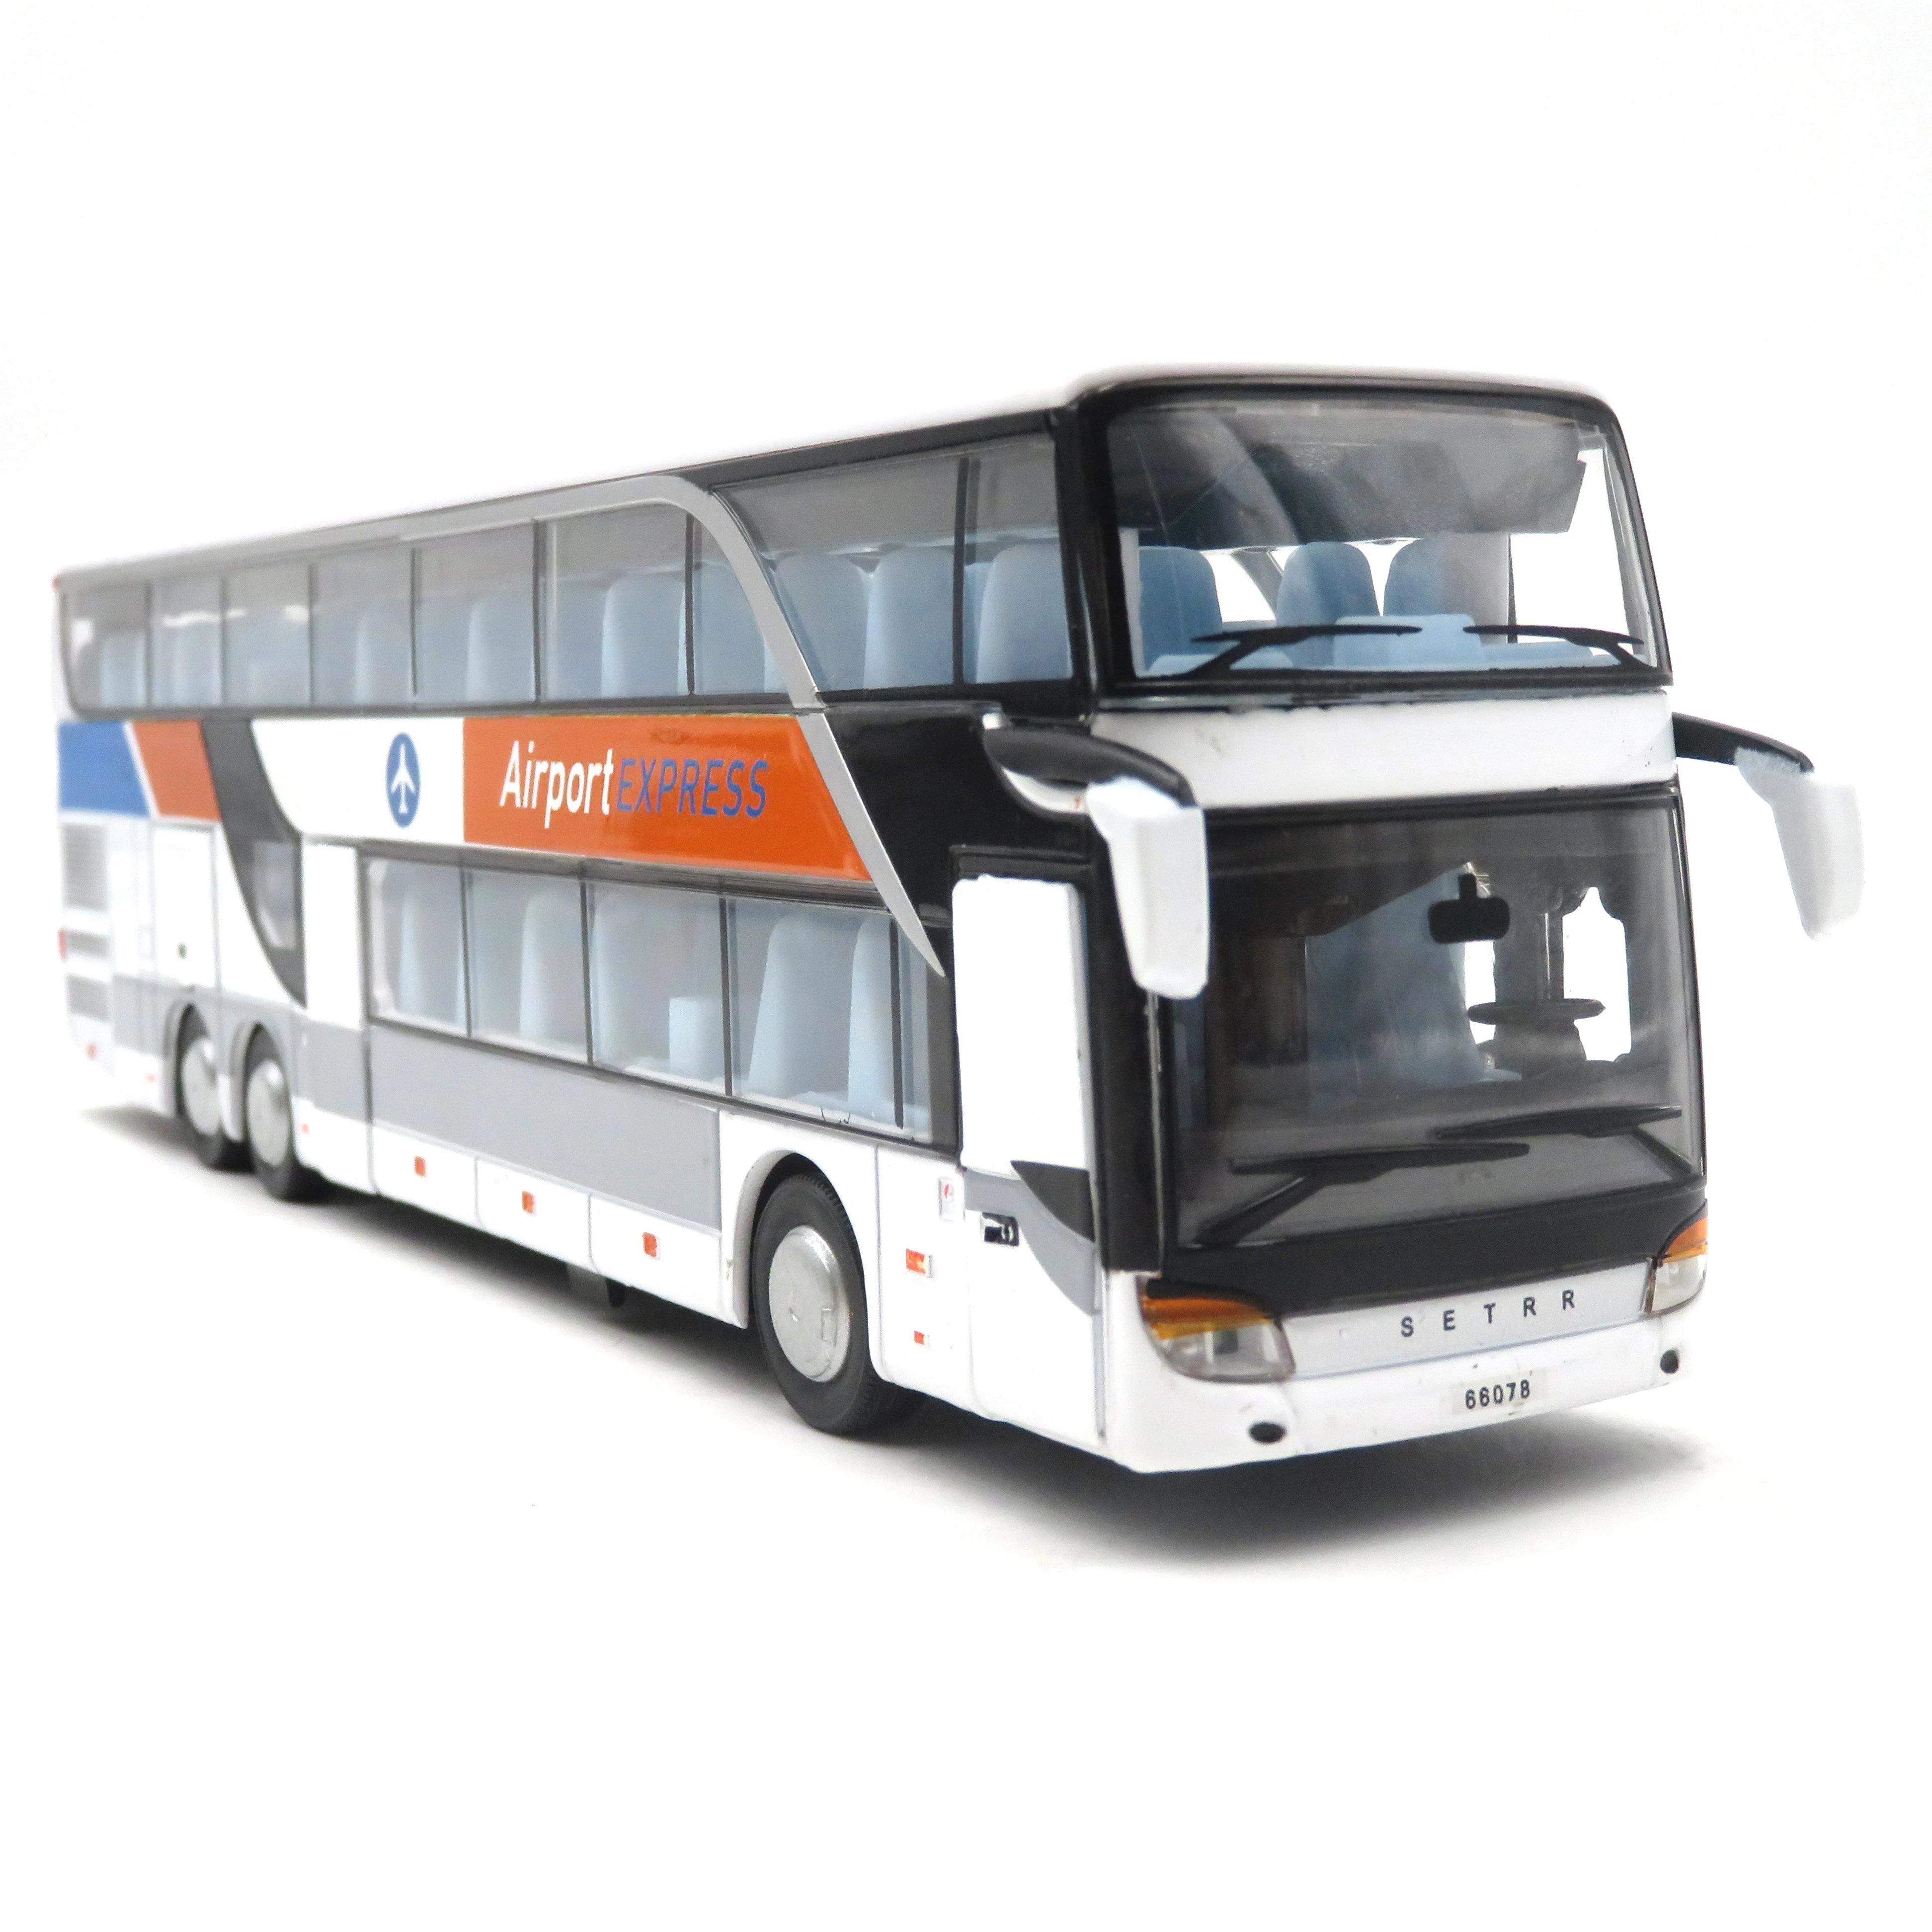 
Light And Sound Popular Scale Vehicle Metal Alloy Bus Model 